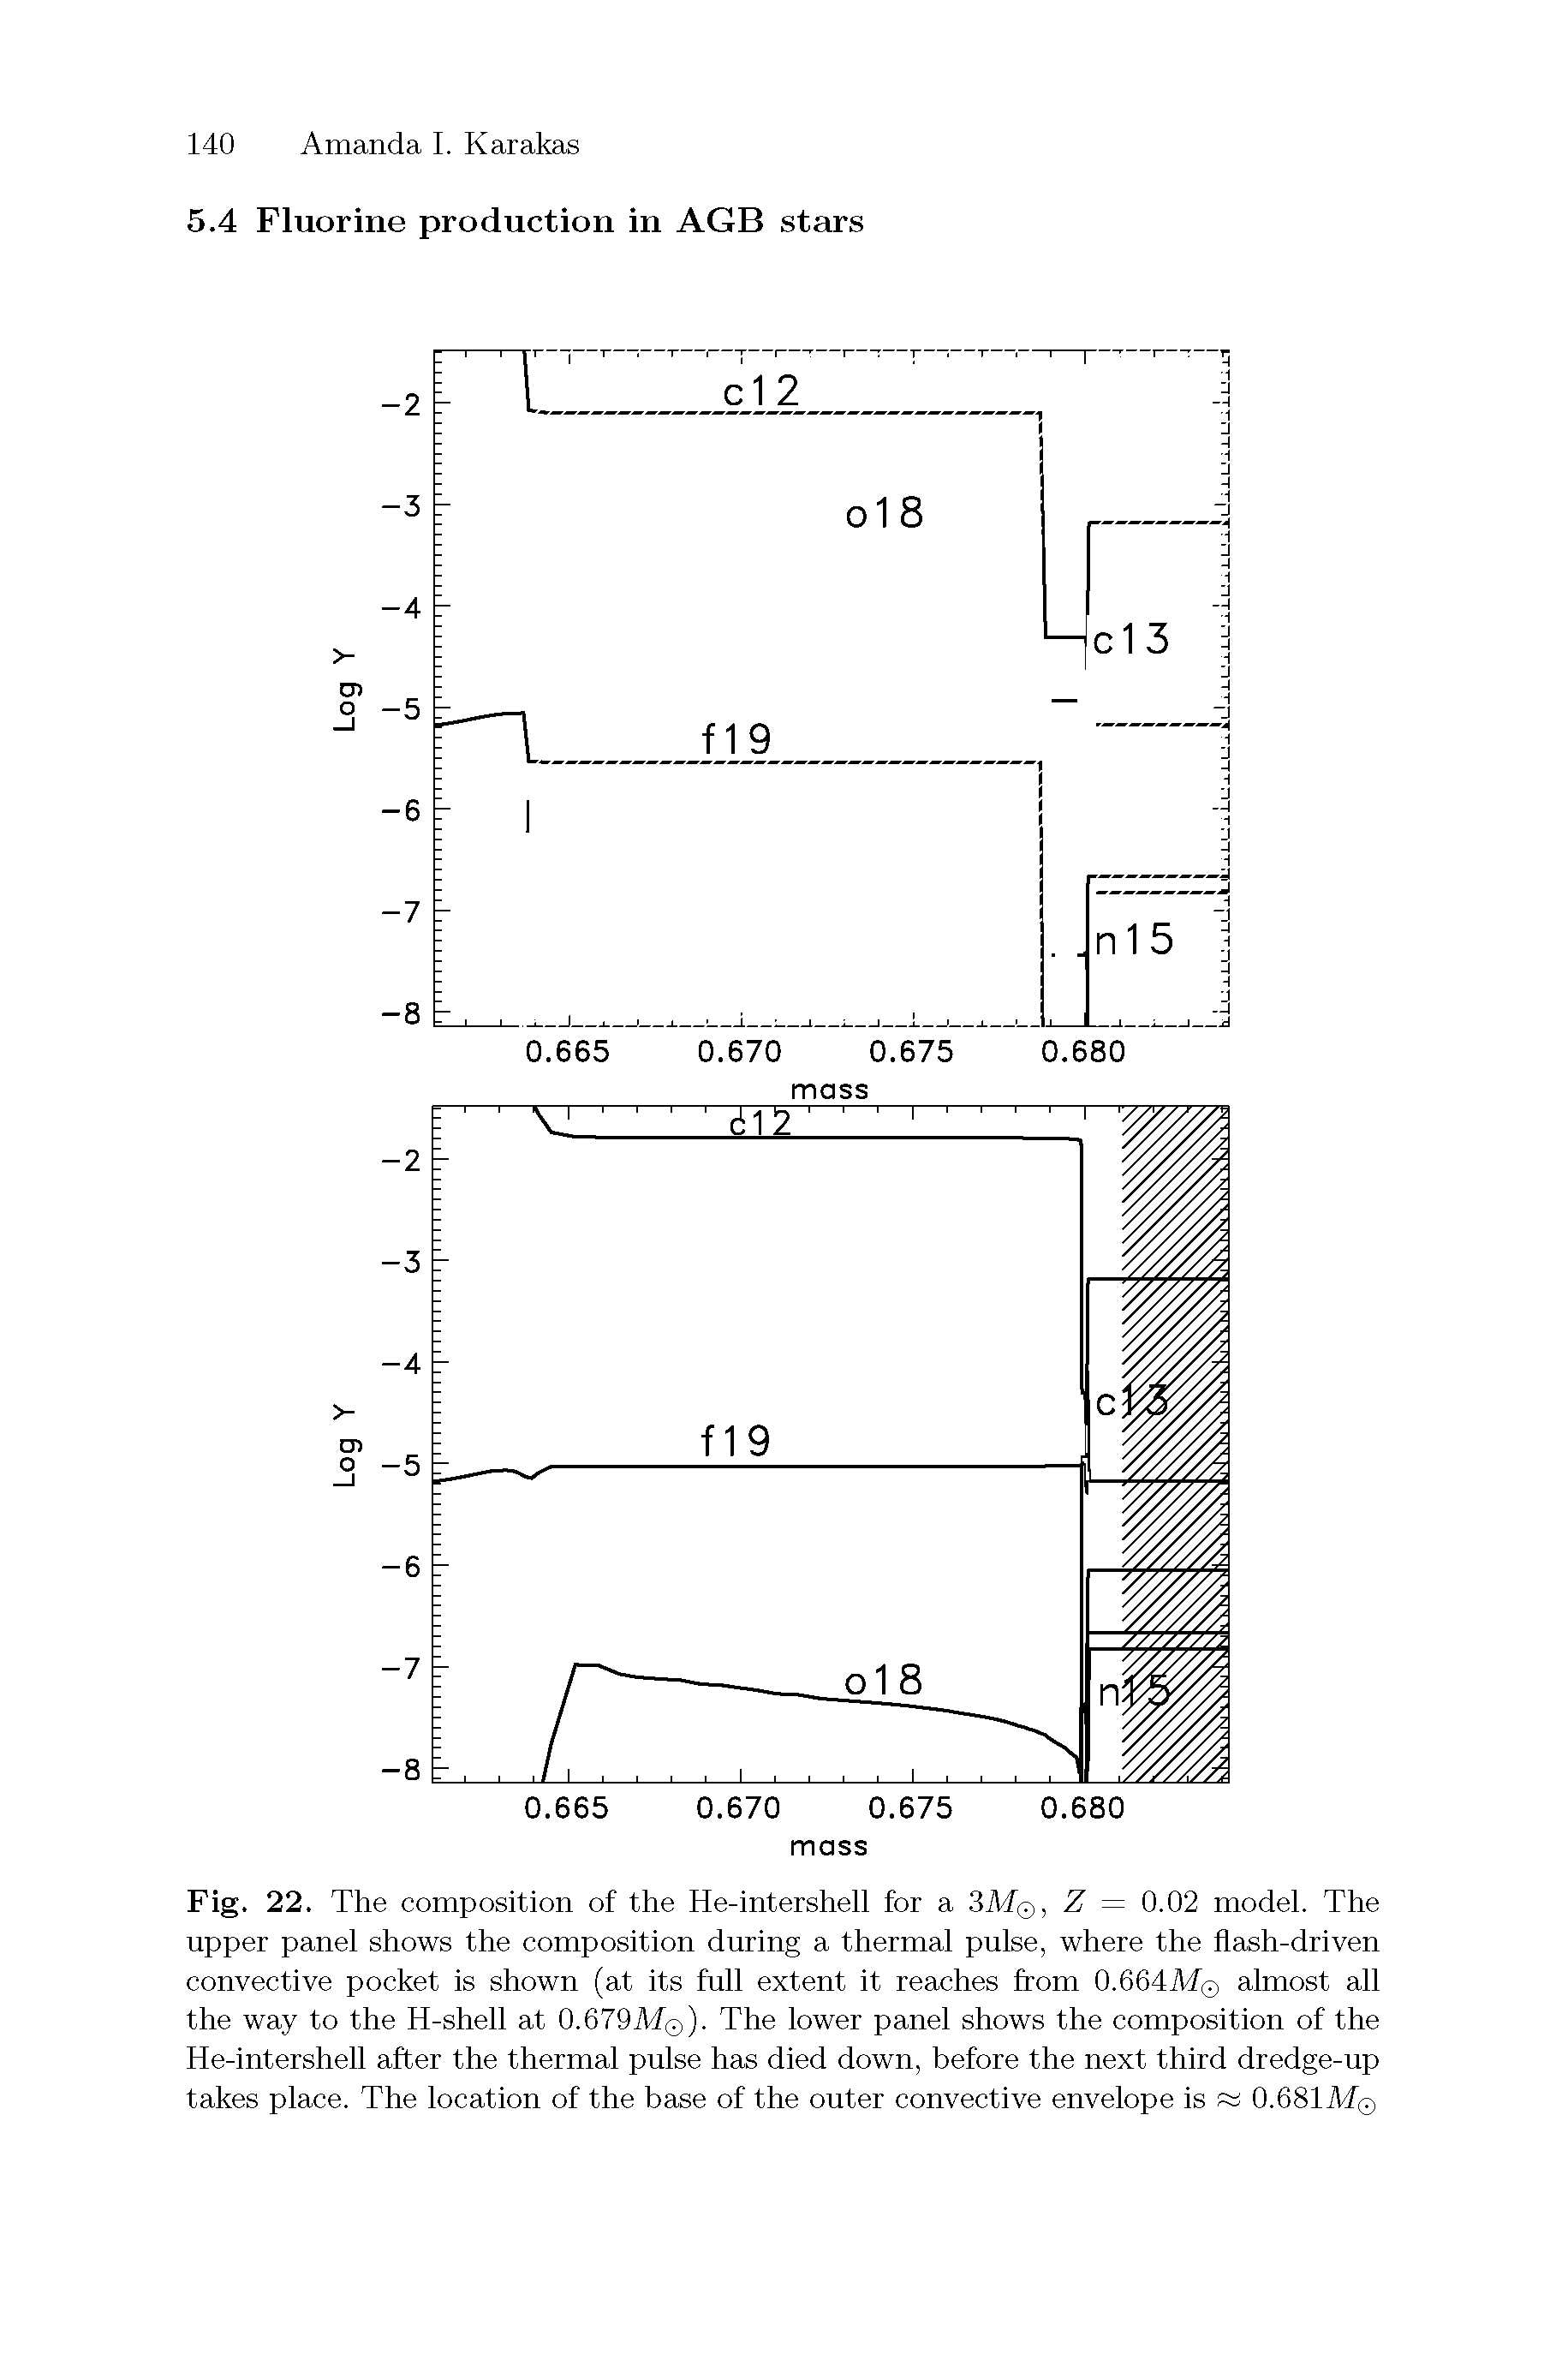 Fig. 22. The composition of the He-intershell for a 3Mq, Z = 0.02 model. The upper panel shows the composition during a thermal pulse, where the flash-driven convective pocket is shown (at its full extent it reaches from 0.664Mq almost all the way to the H-shell at 0.679Mq). The lower panel shows the composition of the He-intershell after the thermal pulse has died down, before the next third dredge-up takes place. The location of the base of the outer convective envelope is 0.681Mq...